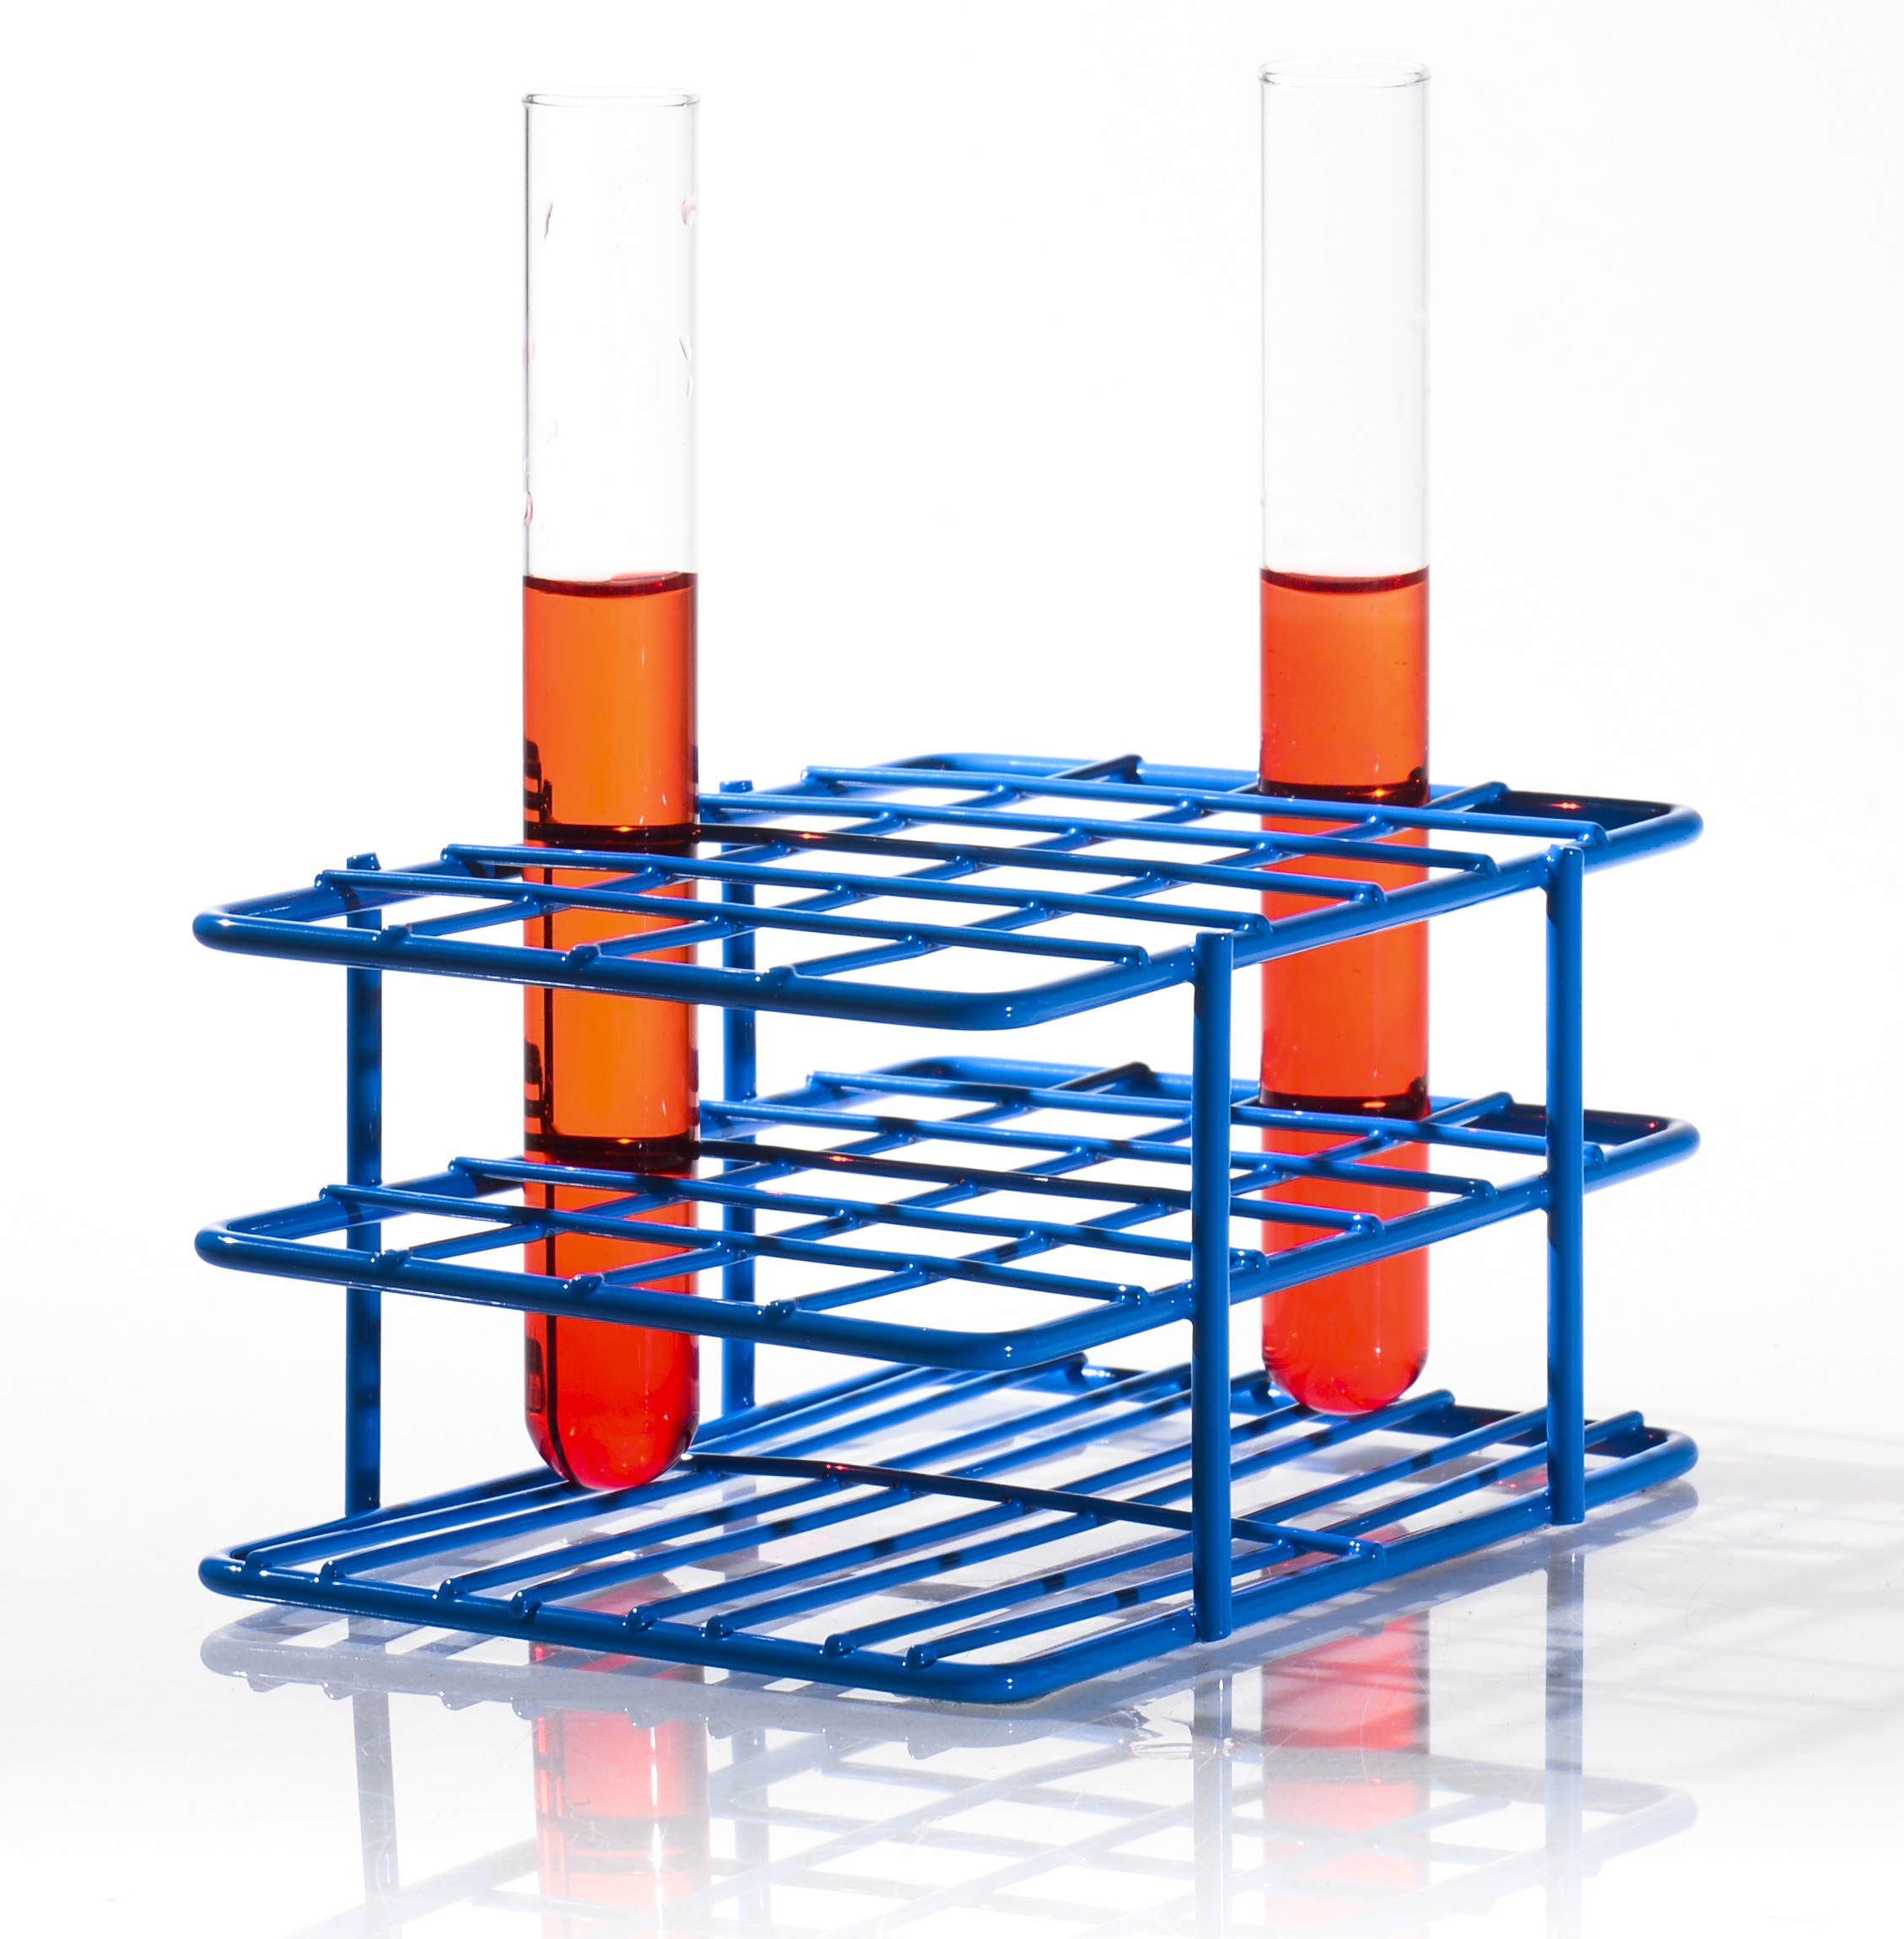 60 Places Bel-Art F18756-0160 Poxygrid Test Tube Rack; 15-16mm 8 x 5¹/₁₆ x 2½ in. 